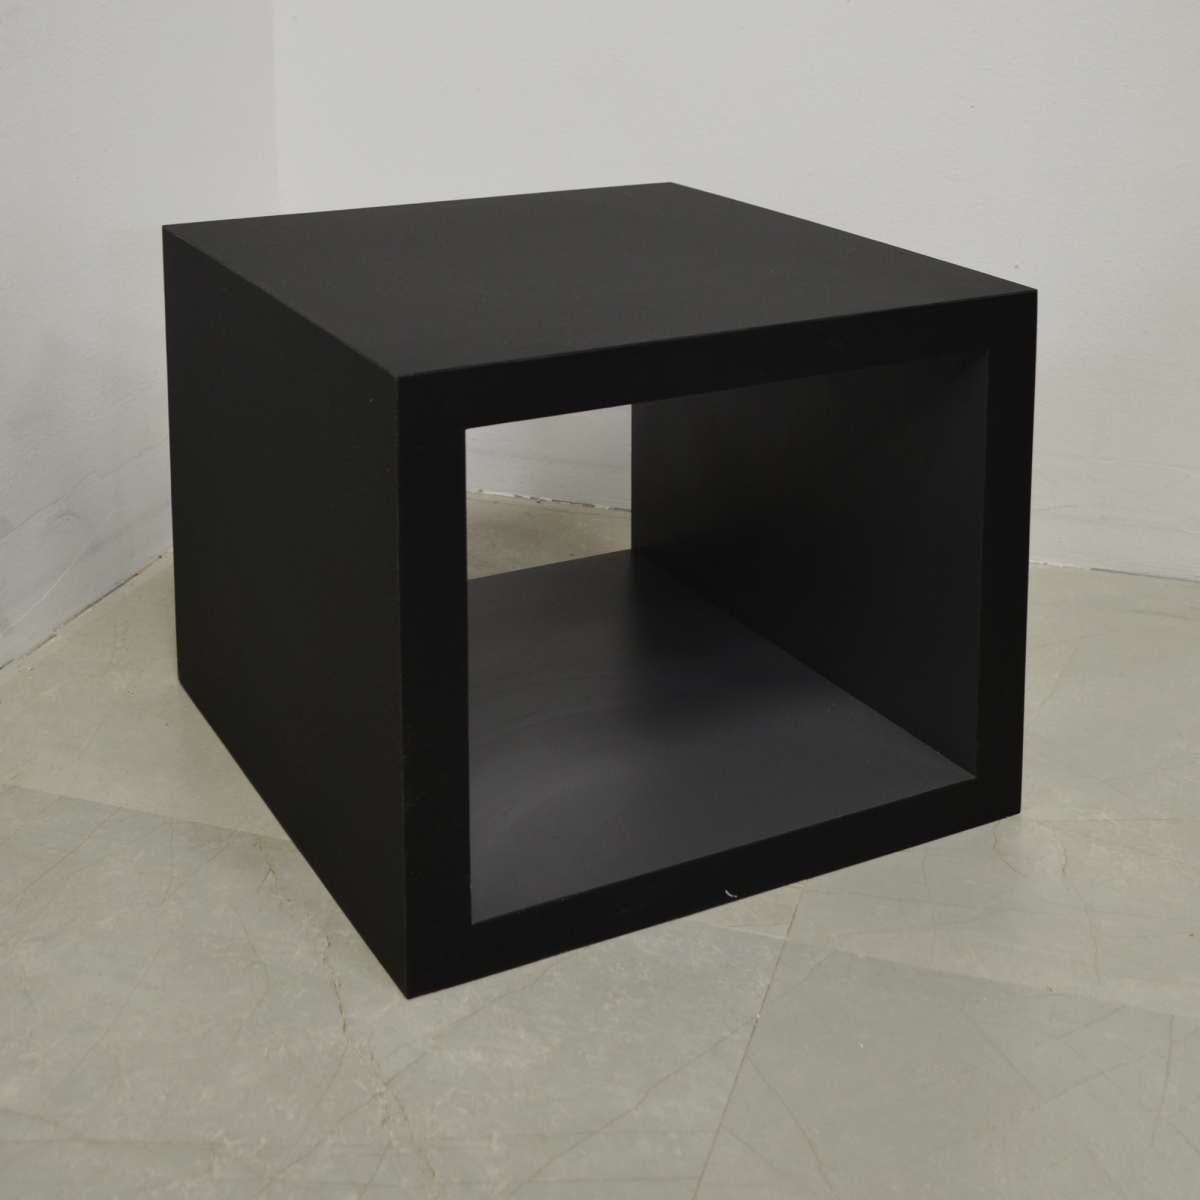 16 in. Axis Cubby Side Table - Stock # 1001-S